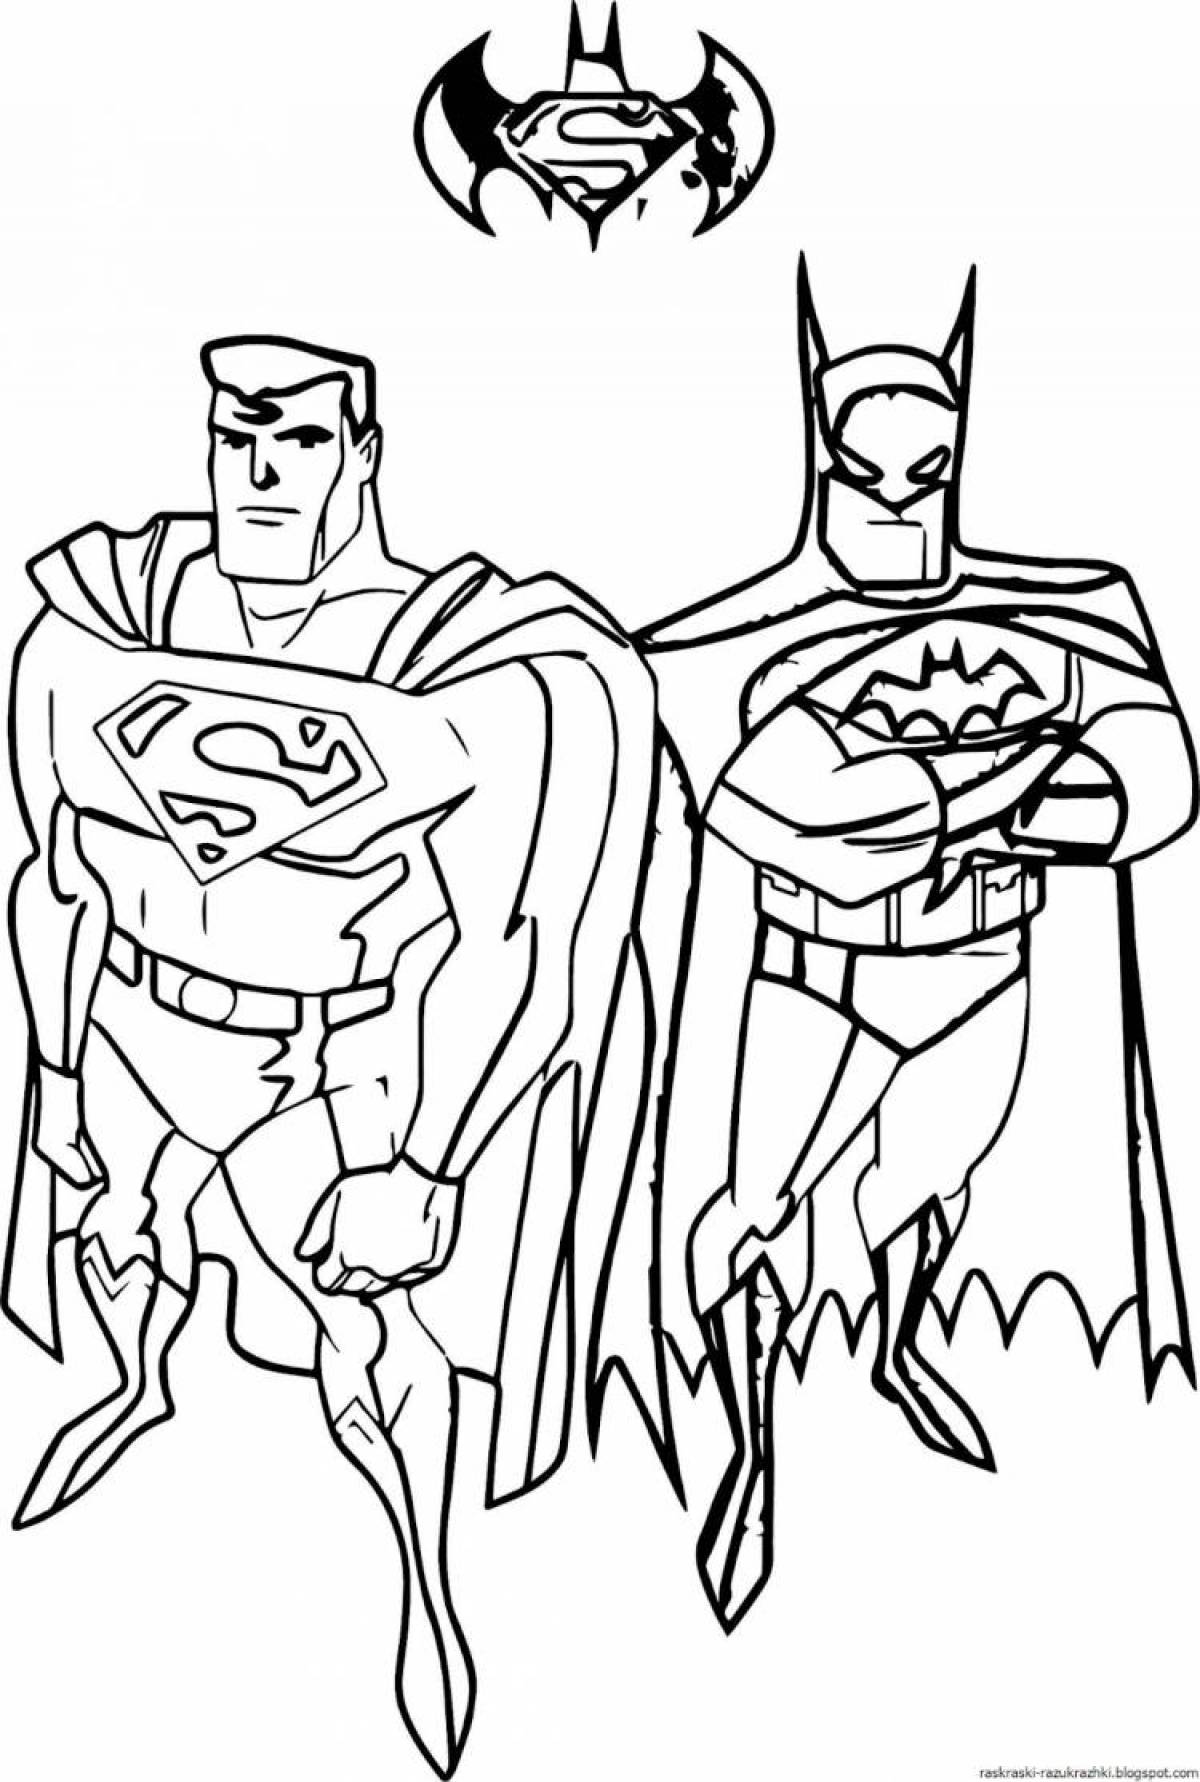 Dazzling superheroes coloring pages for kids